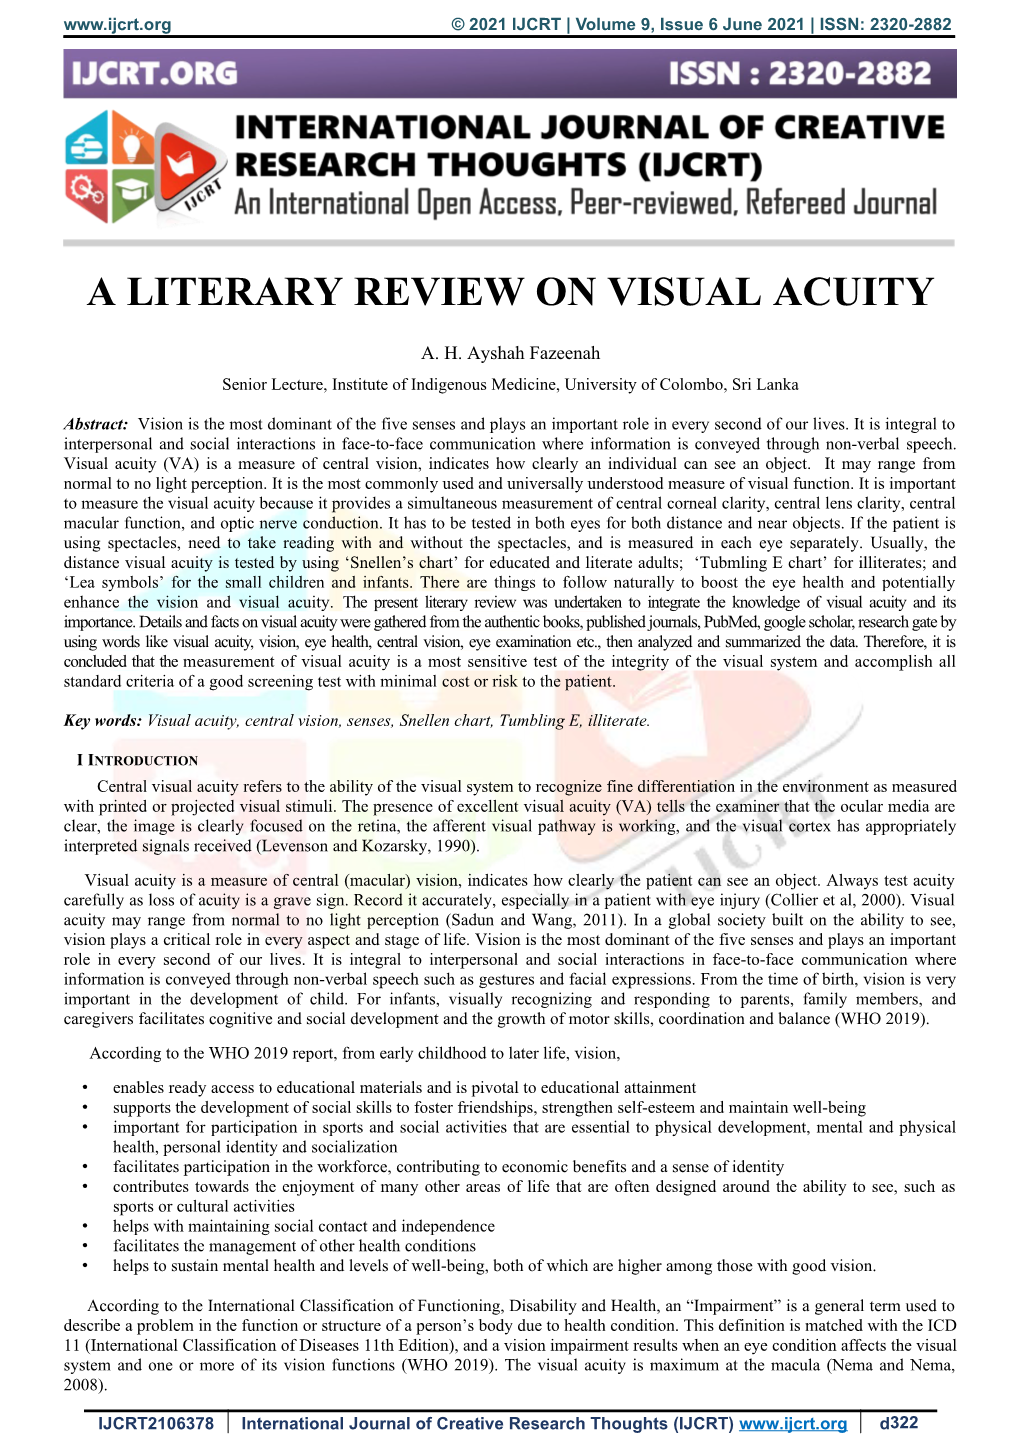 A Literary Review on Visual Acuity